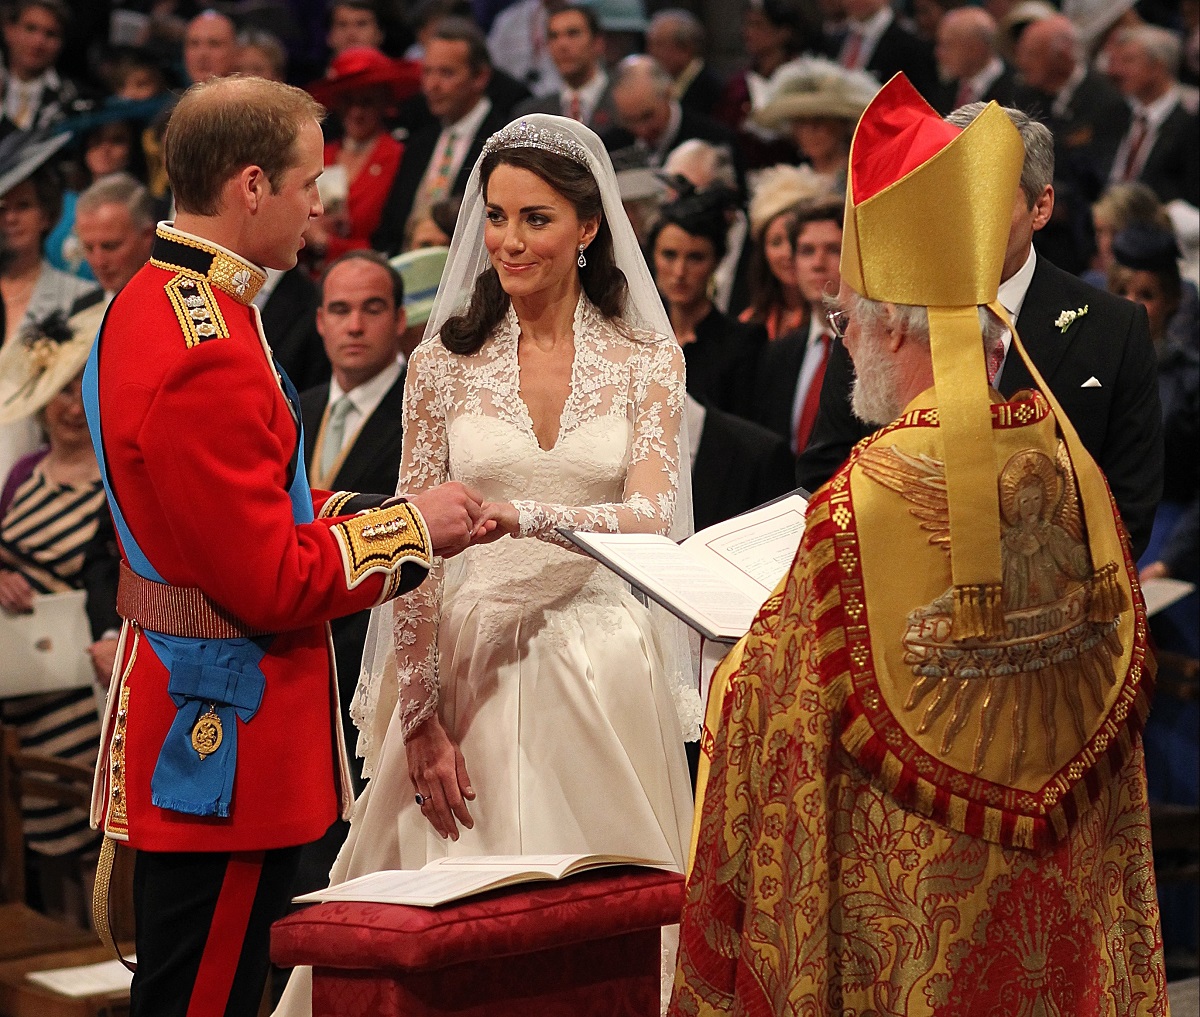 Prince William and Kate Middleton exchange rings in front of the Archbishop of Canterbury Rowan Williams during wedding